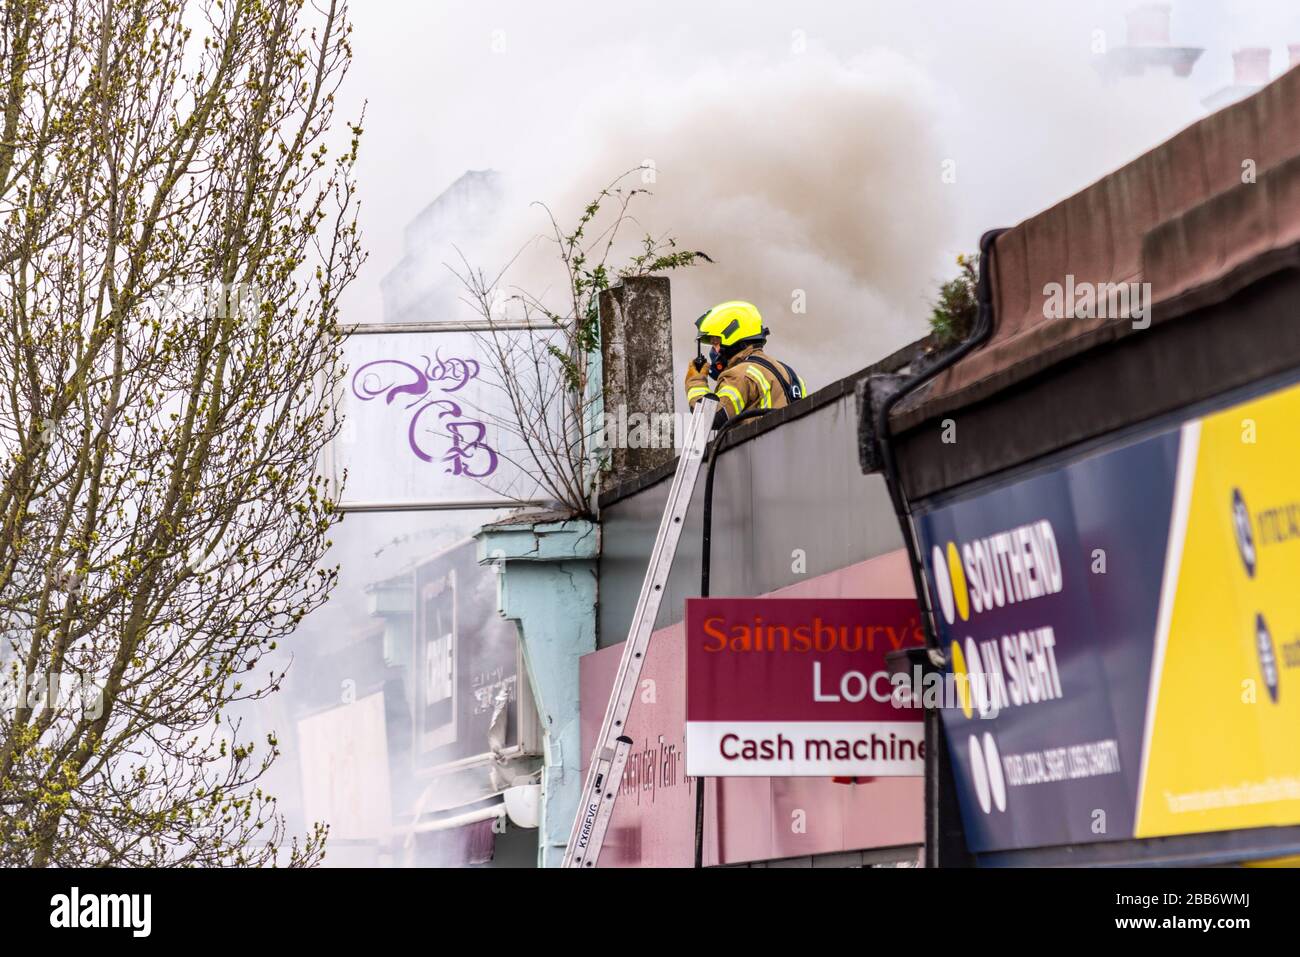 Hamlet Court Road, Westcliff on Sea, Essex, UK. 30th March 2020. A fire next to a Sainsbury’s supermarket has created unwelcome issues during the COVID-19 Coronavirus pandemic. It required the attendance of a large number of emergency services, has affected one of the largest food suppliers in the area and has attracted groups of people not complying with social distancing guidelines. A spokesman for Essex Police said: 'We were called following a fire within a shop at around 5pm. While carrying out a search of the property over 500 cannabis plants were found' Stock Photo